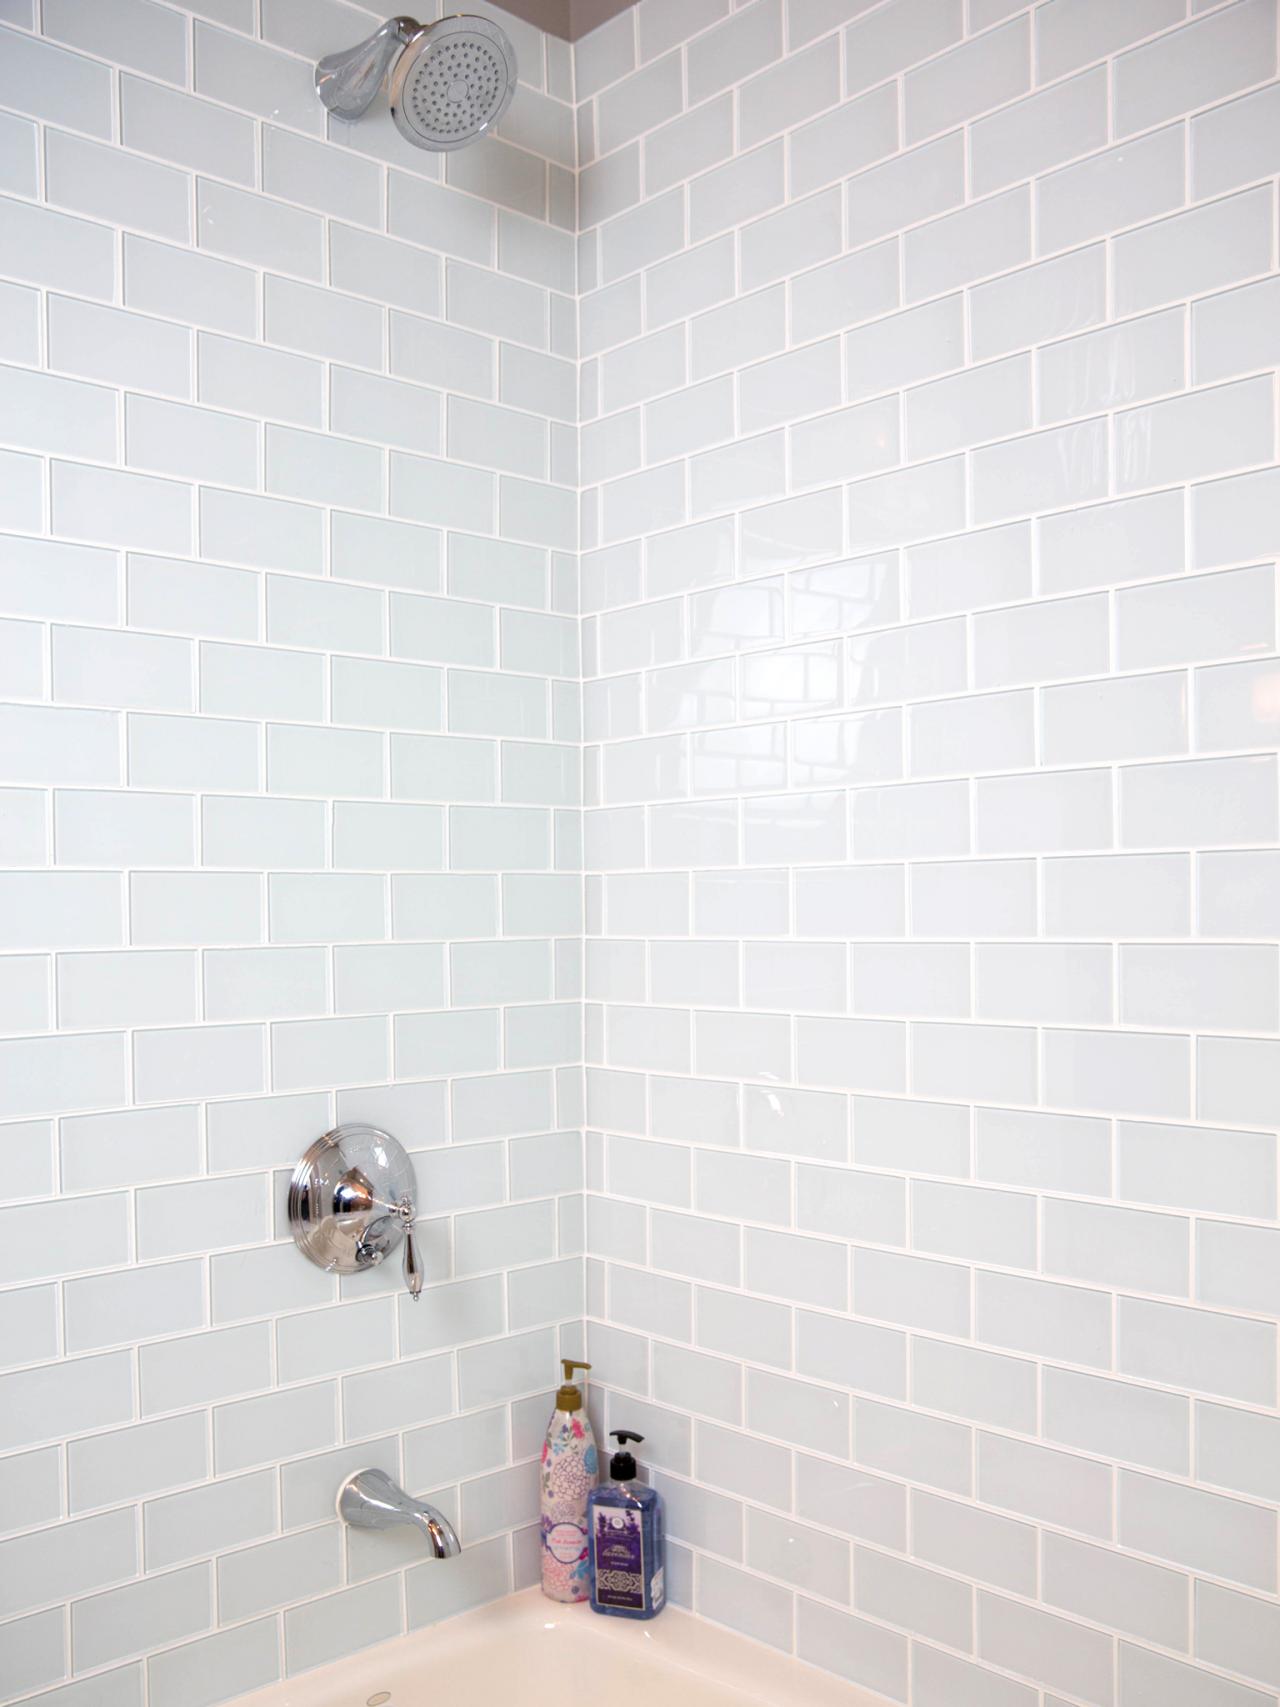 How To Install A Shower Tile Wall, How To Tile A Bathroom Yourself